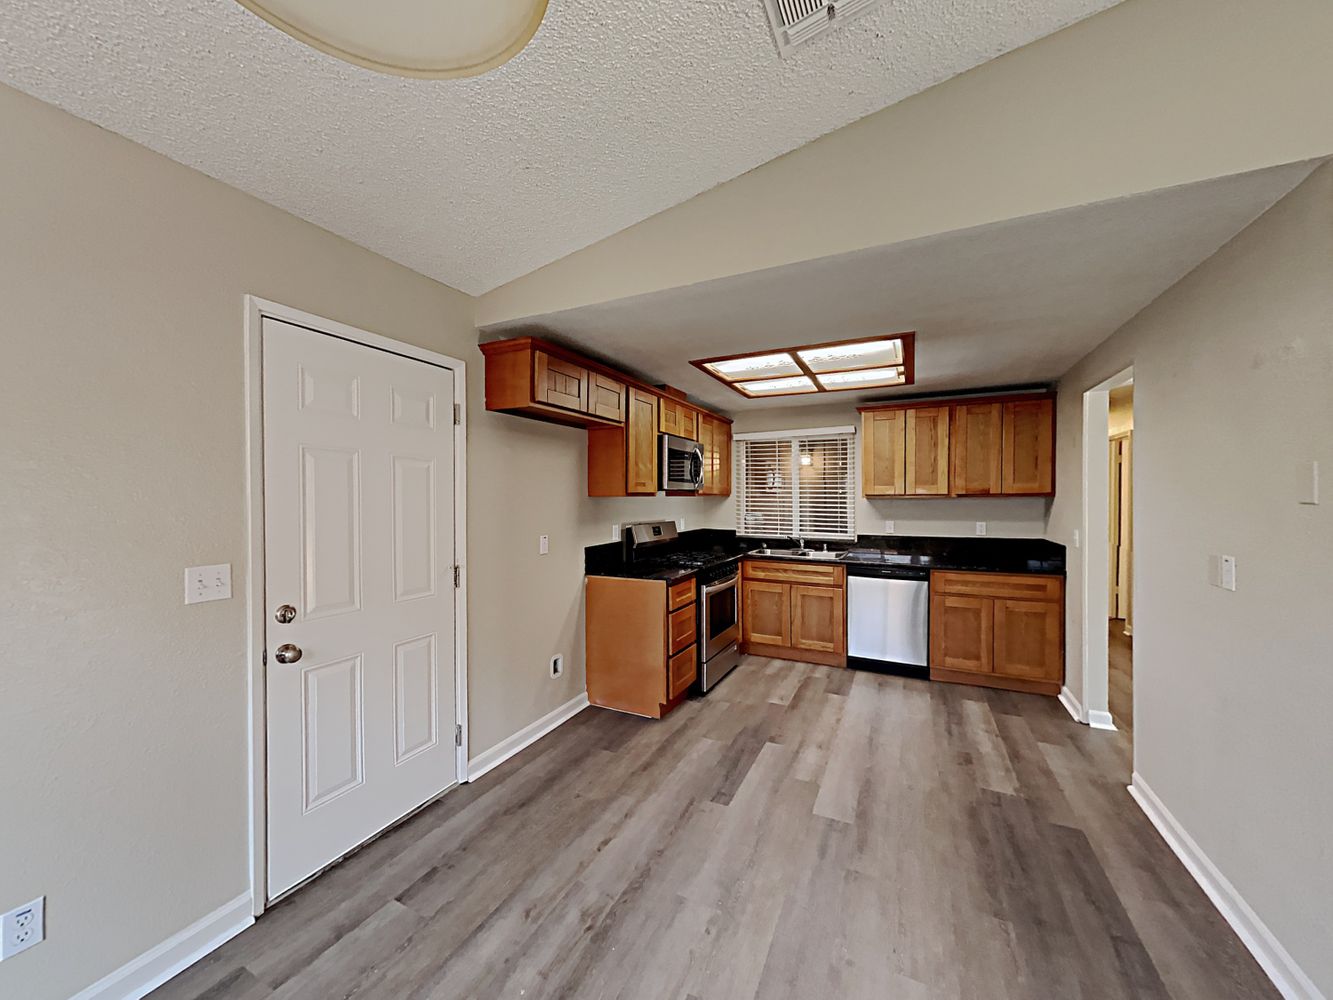 Front door, foyer, and kitchen view with luxury vinyl-plank flooring at Invitation Homes Northern CA.